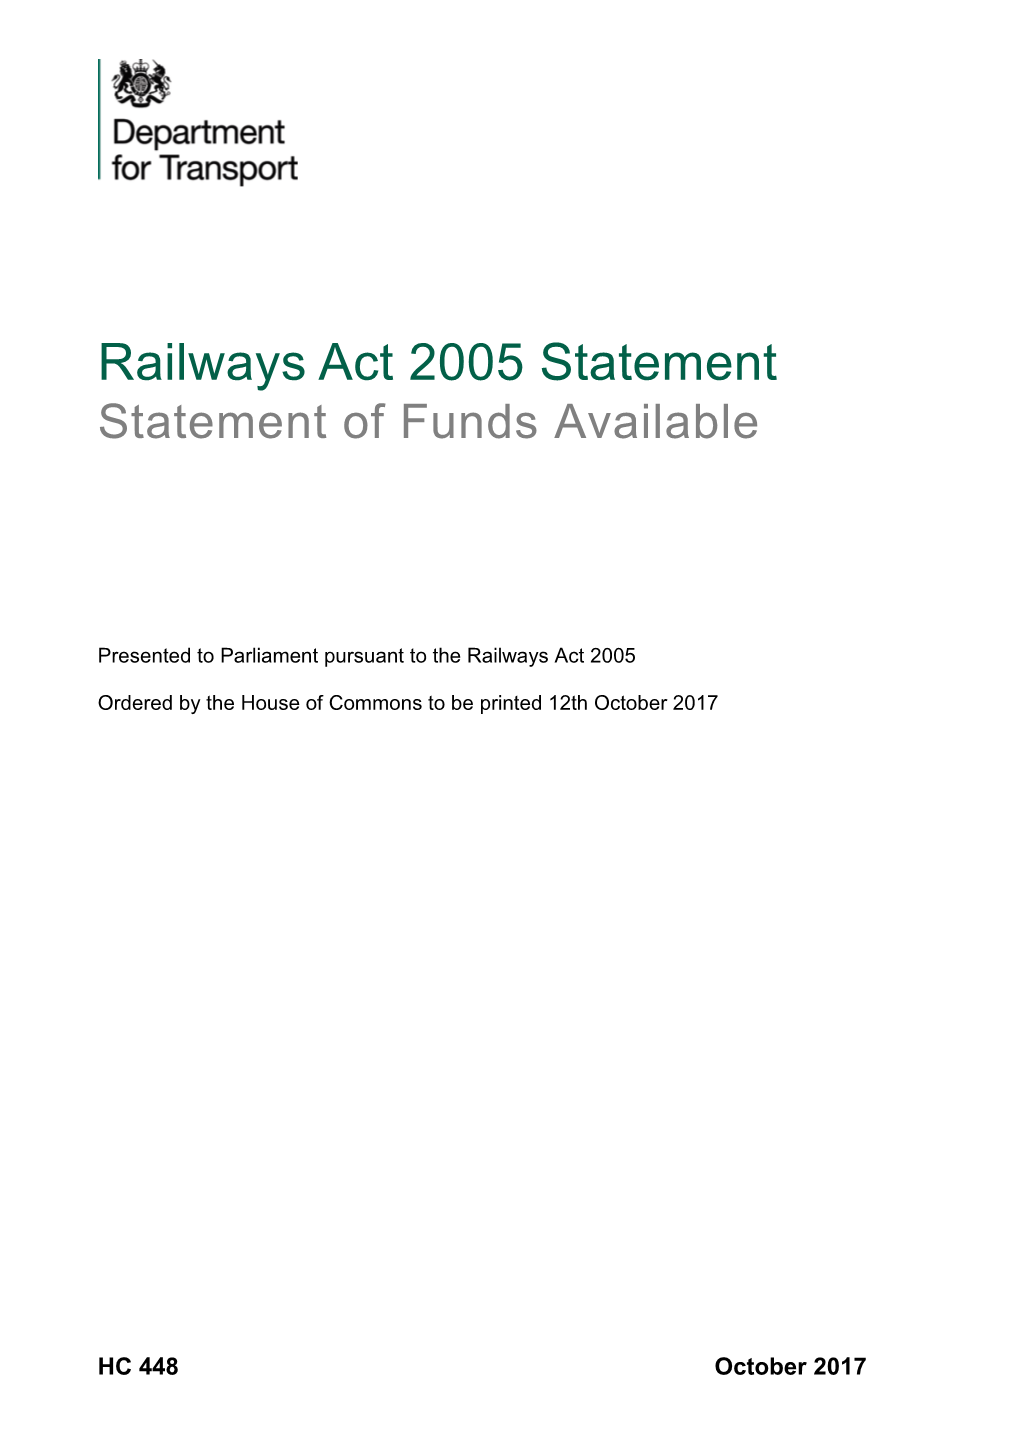 Railways Act 2005 Statement of Funds Available 2017